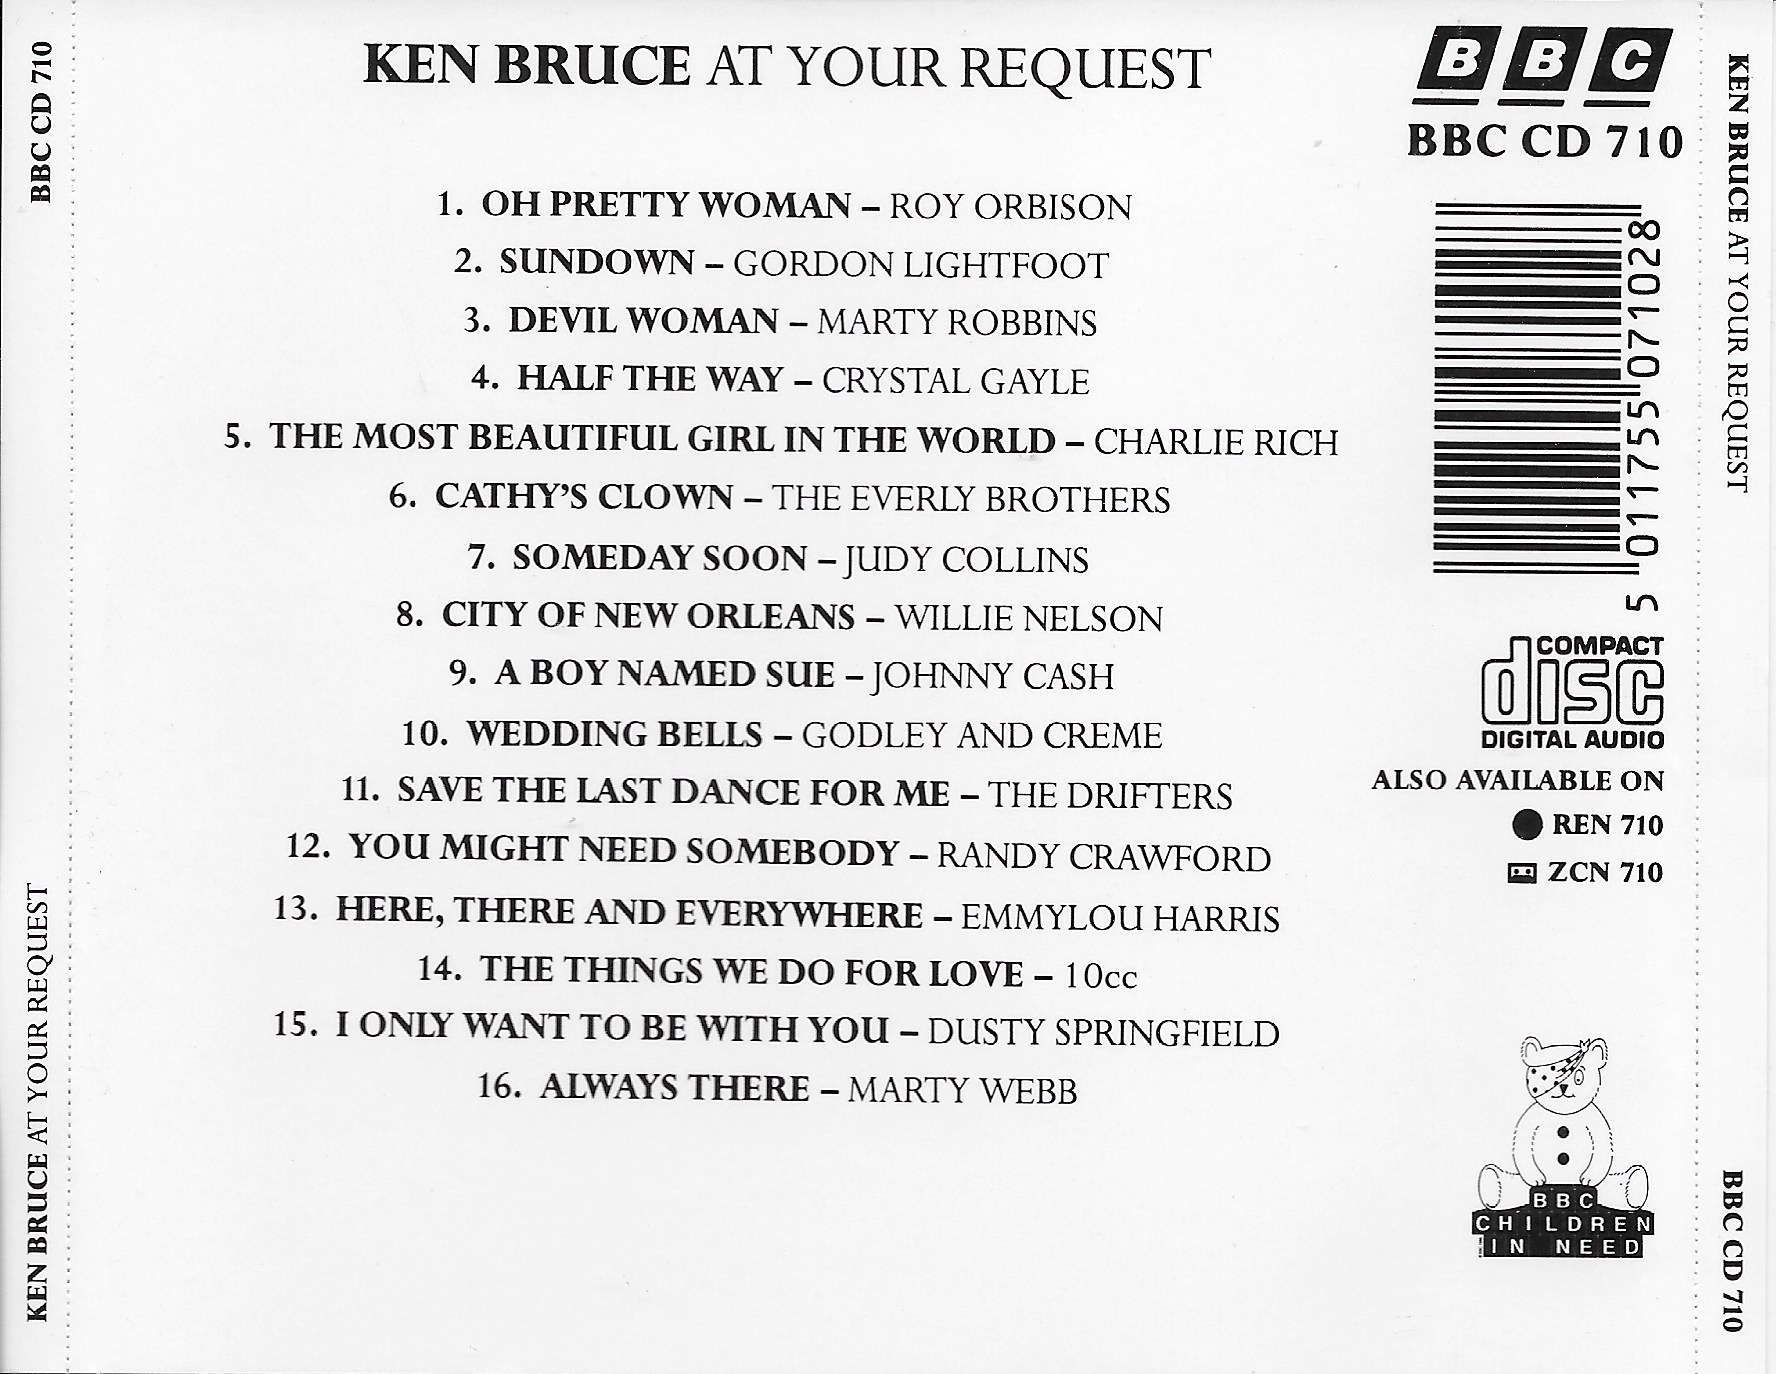 Picture of BBCCD710 At your request - Ken Bruce by artist Ken Bruce from the BBC records and Tapes library